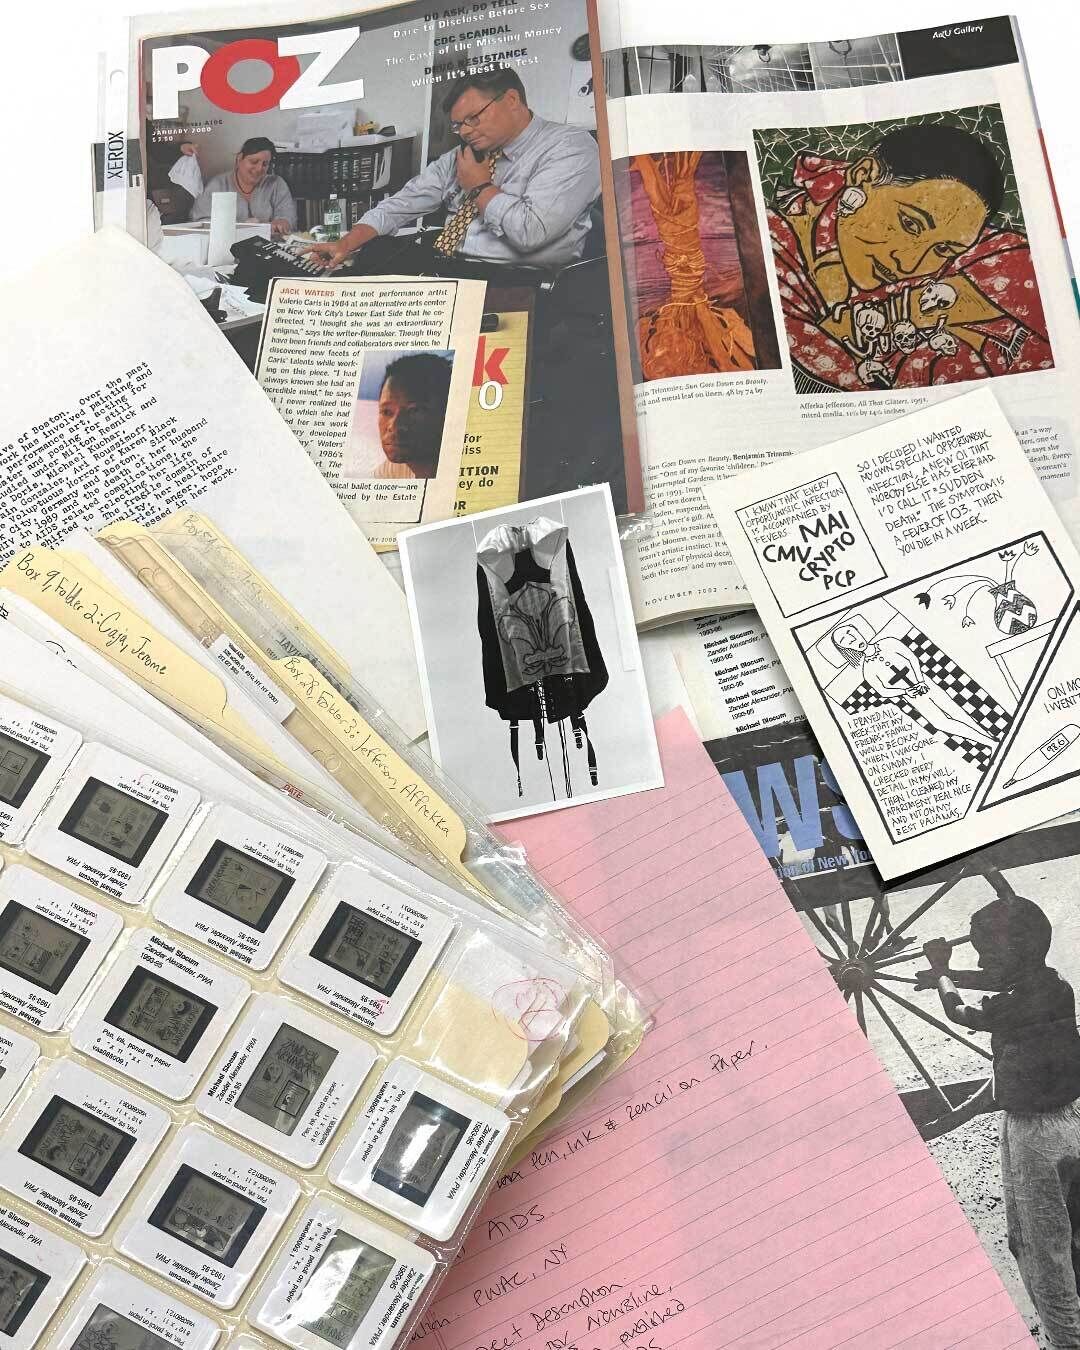 A range of archival materials spread across a white table, including
slides, file folders, typewritten documents, magazine spreads, and a small black-and-white photograph.